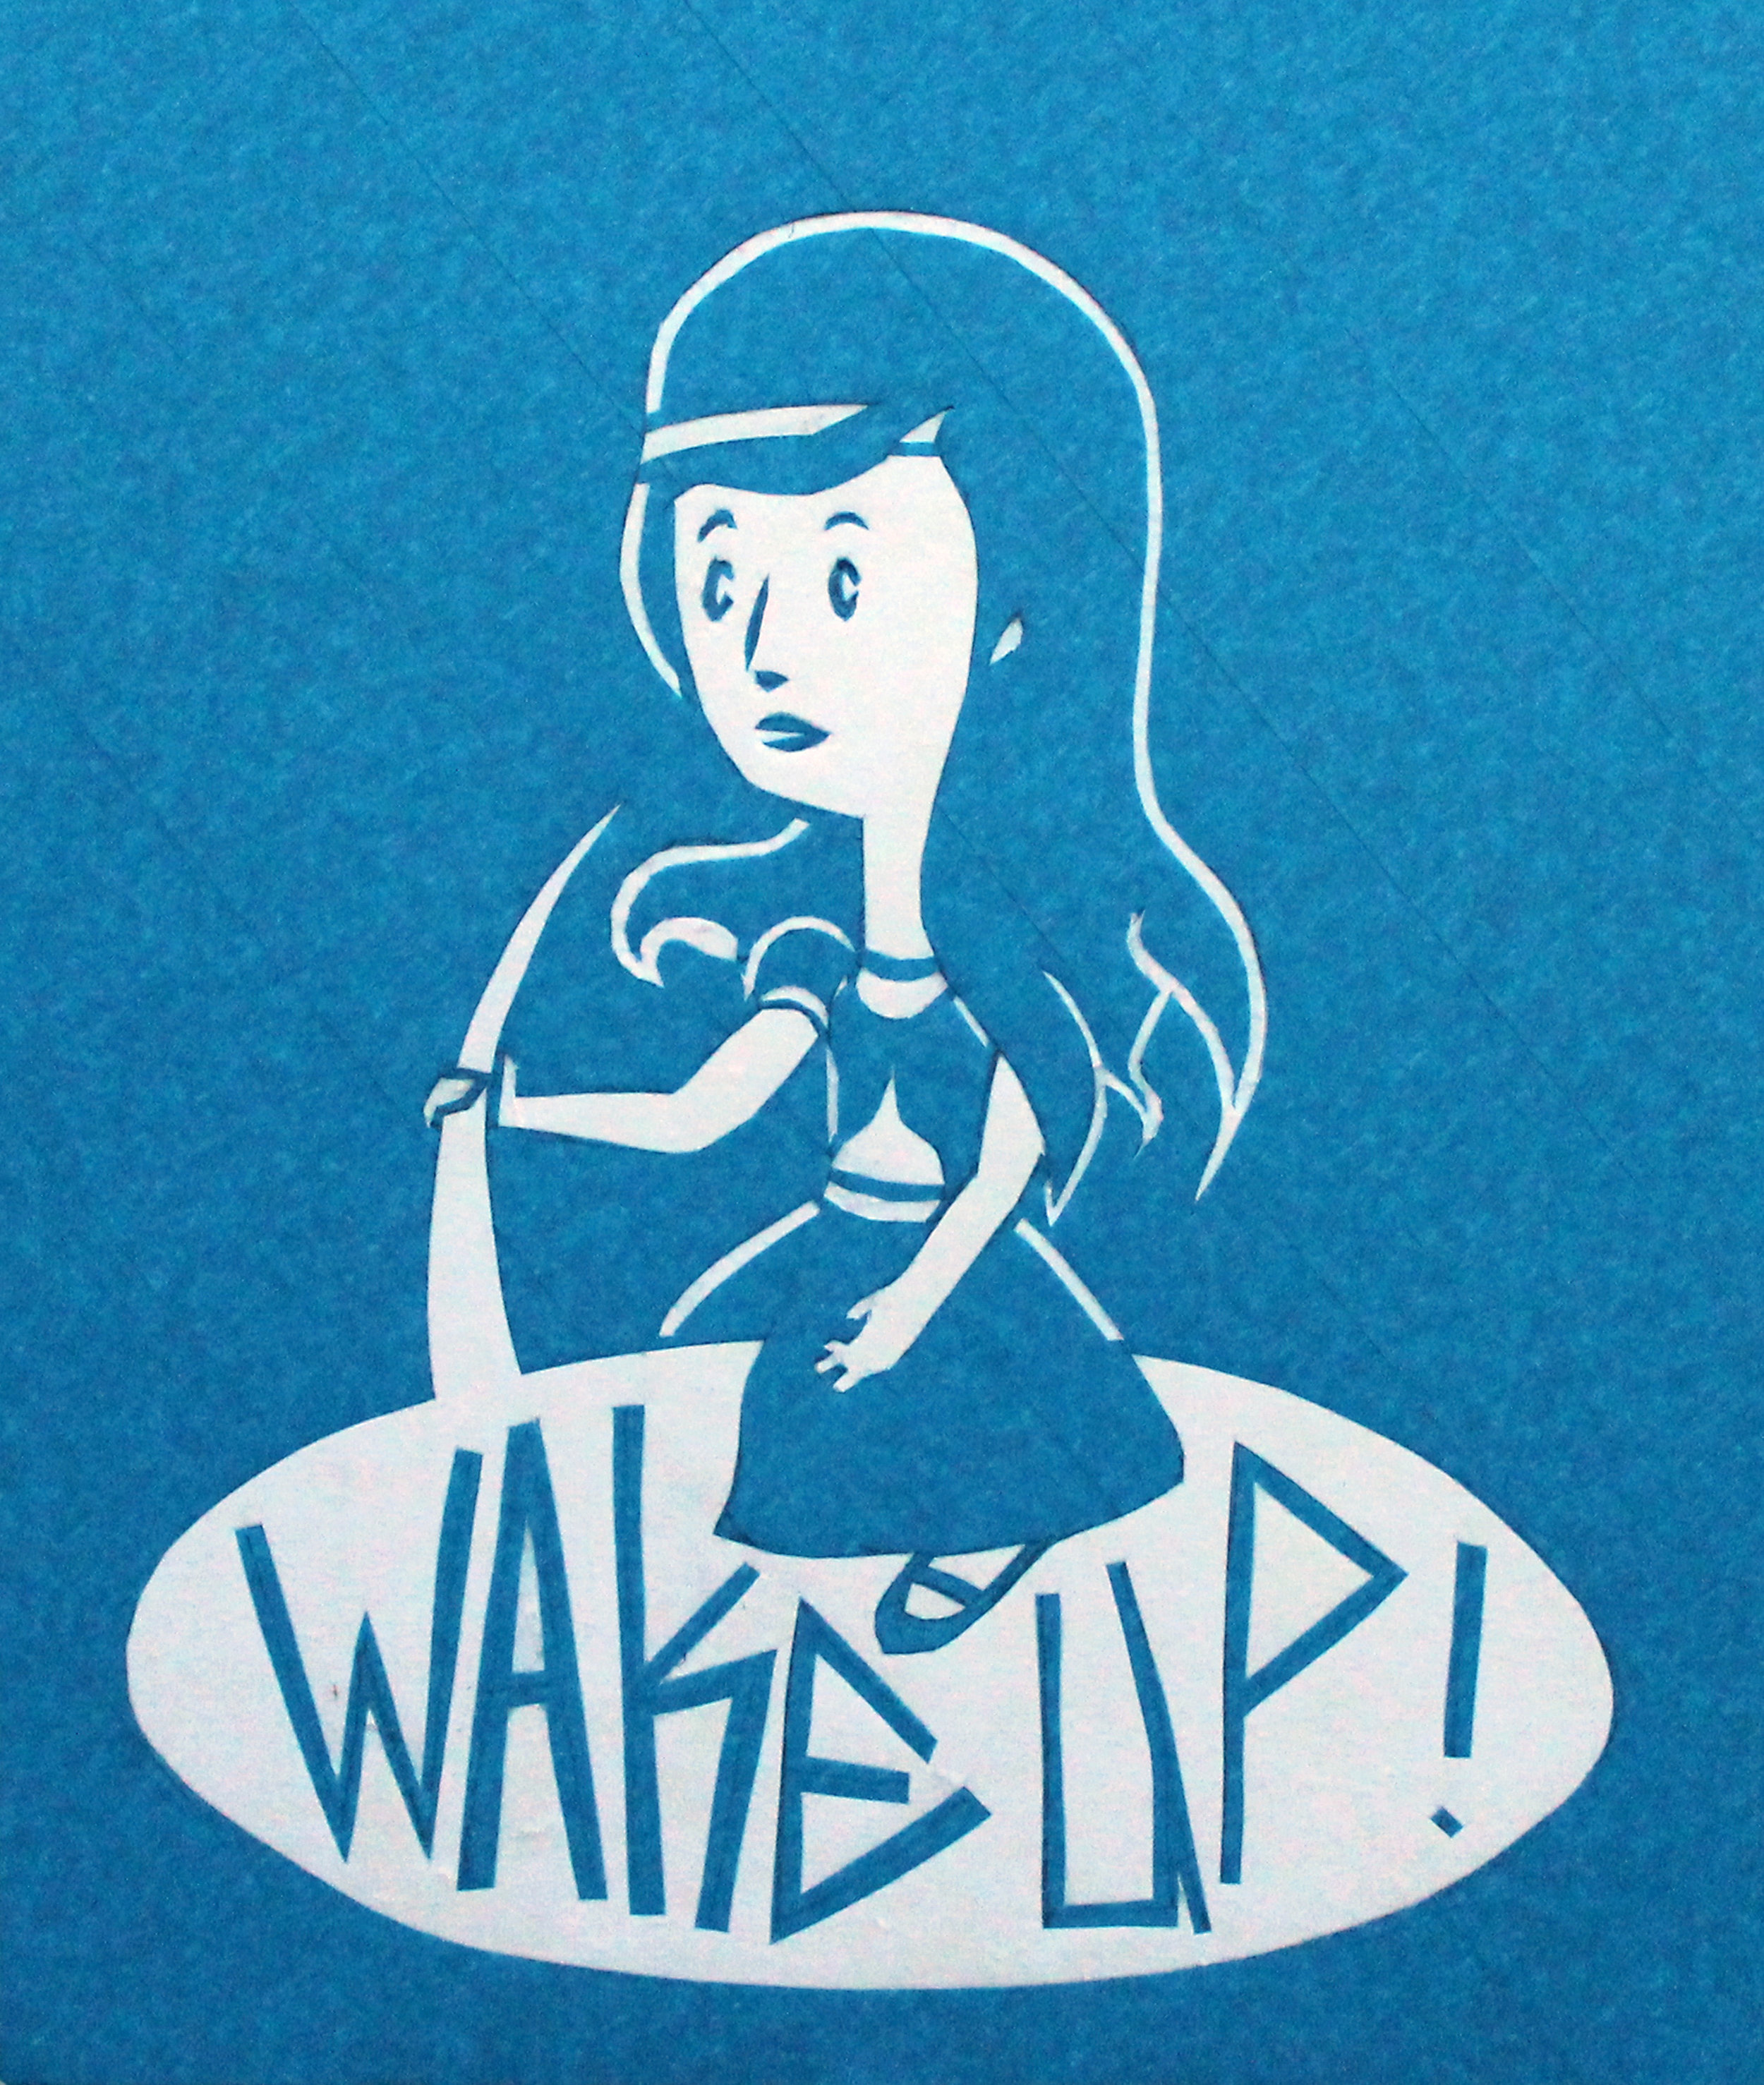   Wake Up  masking tape on paper, inspired by WPA posters, 2014  exhibited -  Bailey Contemporary Arts during Pages From The Big Book 2022;   C&amp;I Studios during Portraits of The Little Girl 2016  